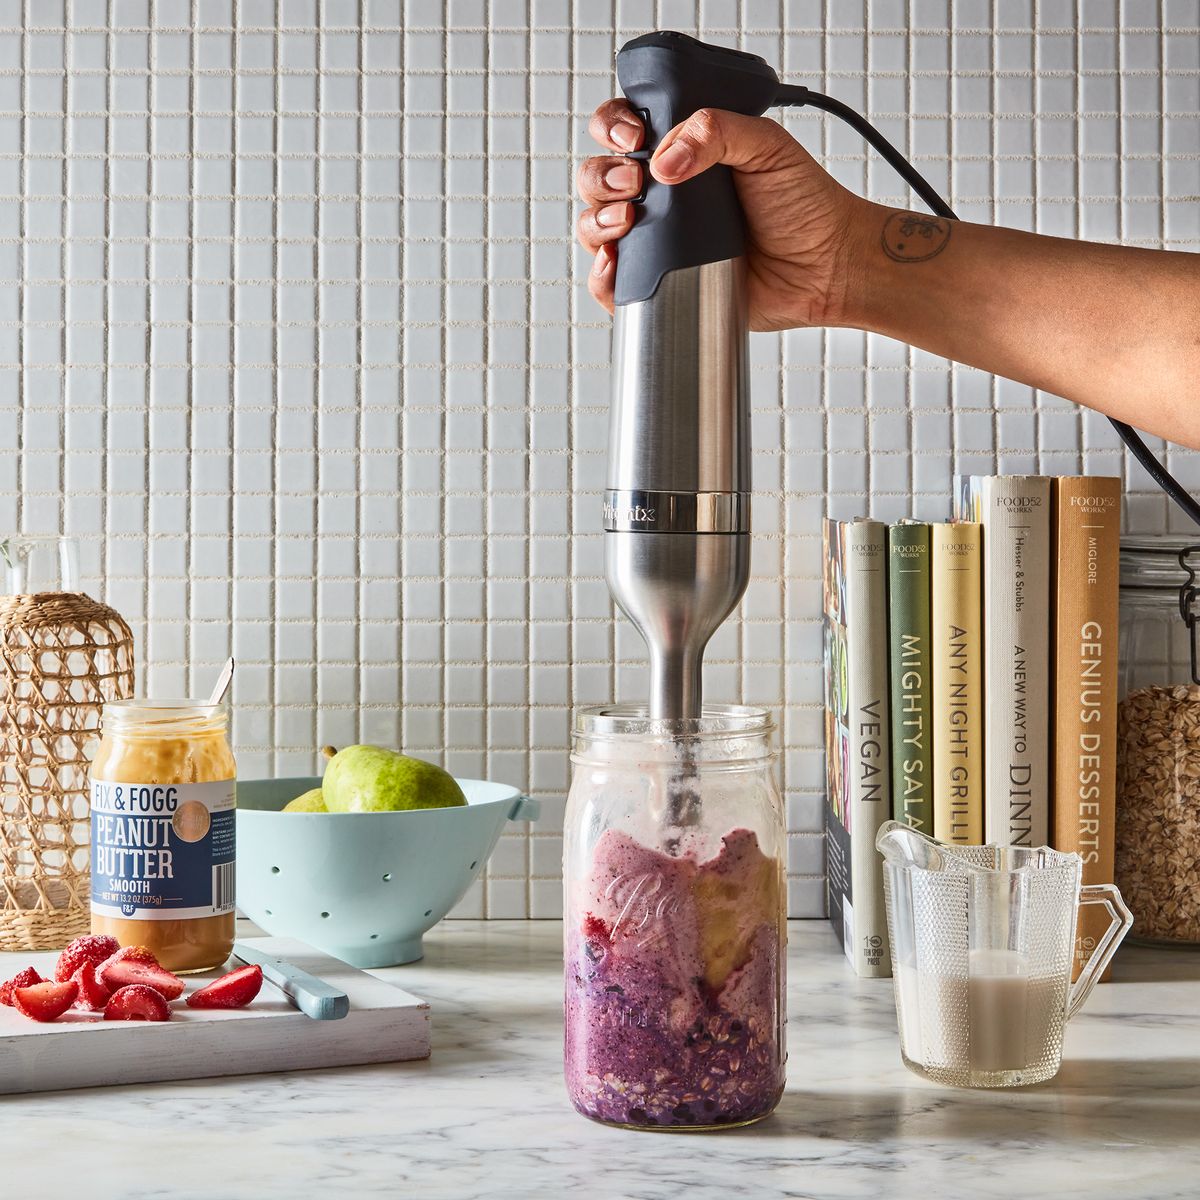 Your Complete Guide on Cool Kitchen Gadgets for Moms - Mom Blog Society